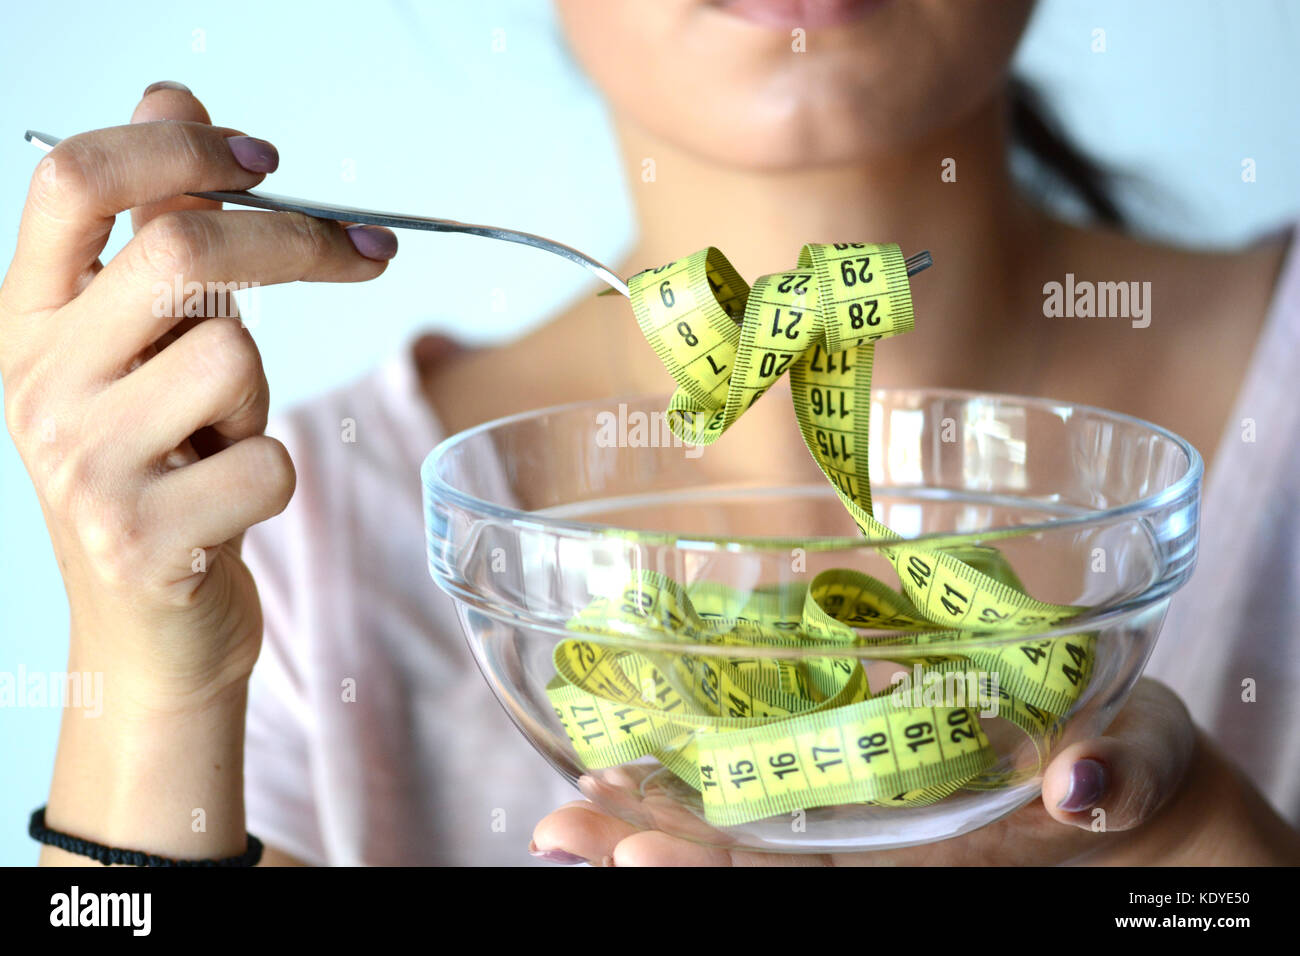 Young woman on diet eating a yellow measurement tape from a transparent bowl, abstract image Stock Photo